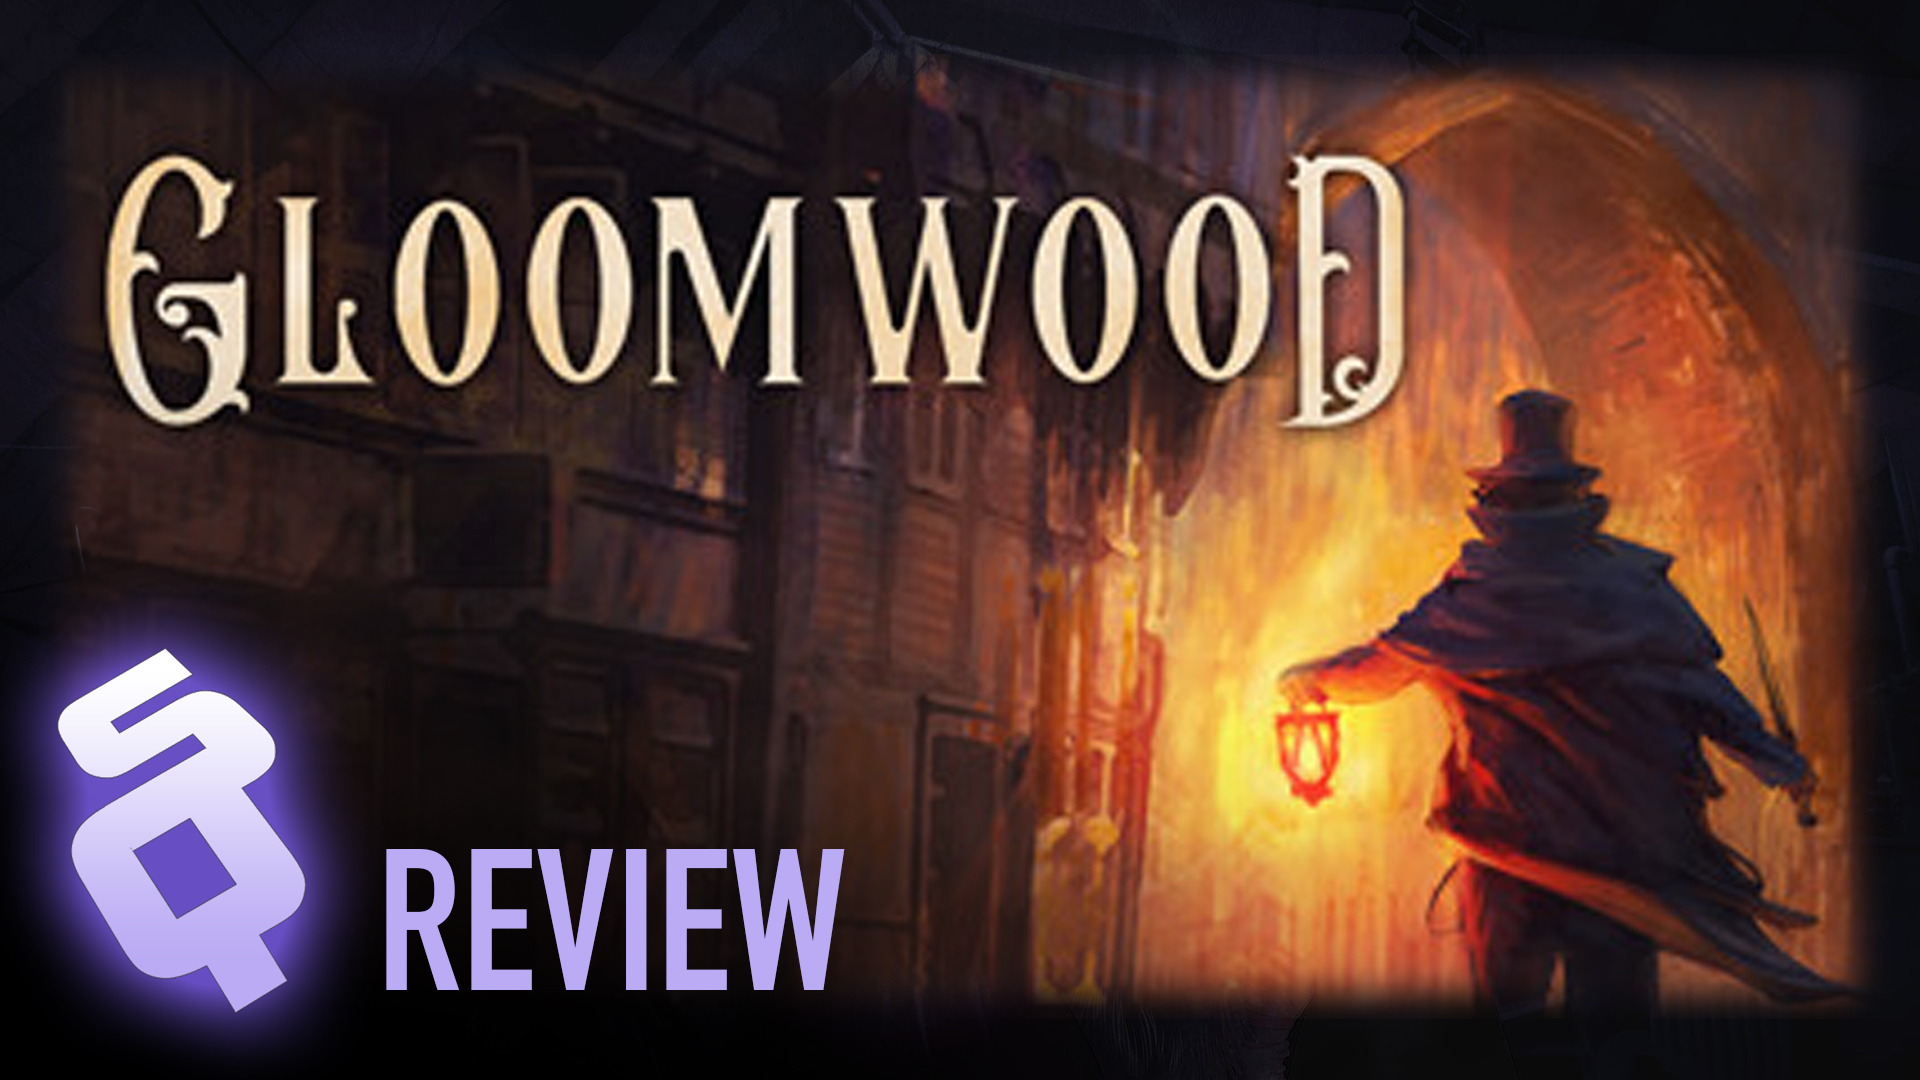 Hot Take: Gloomwood early access